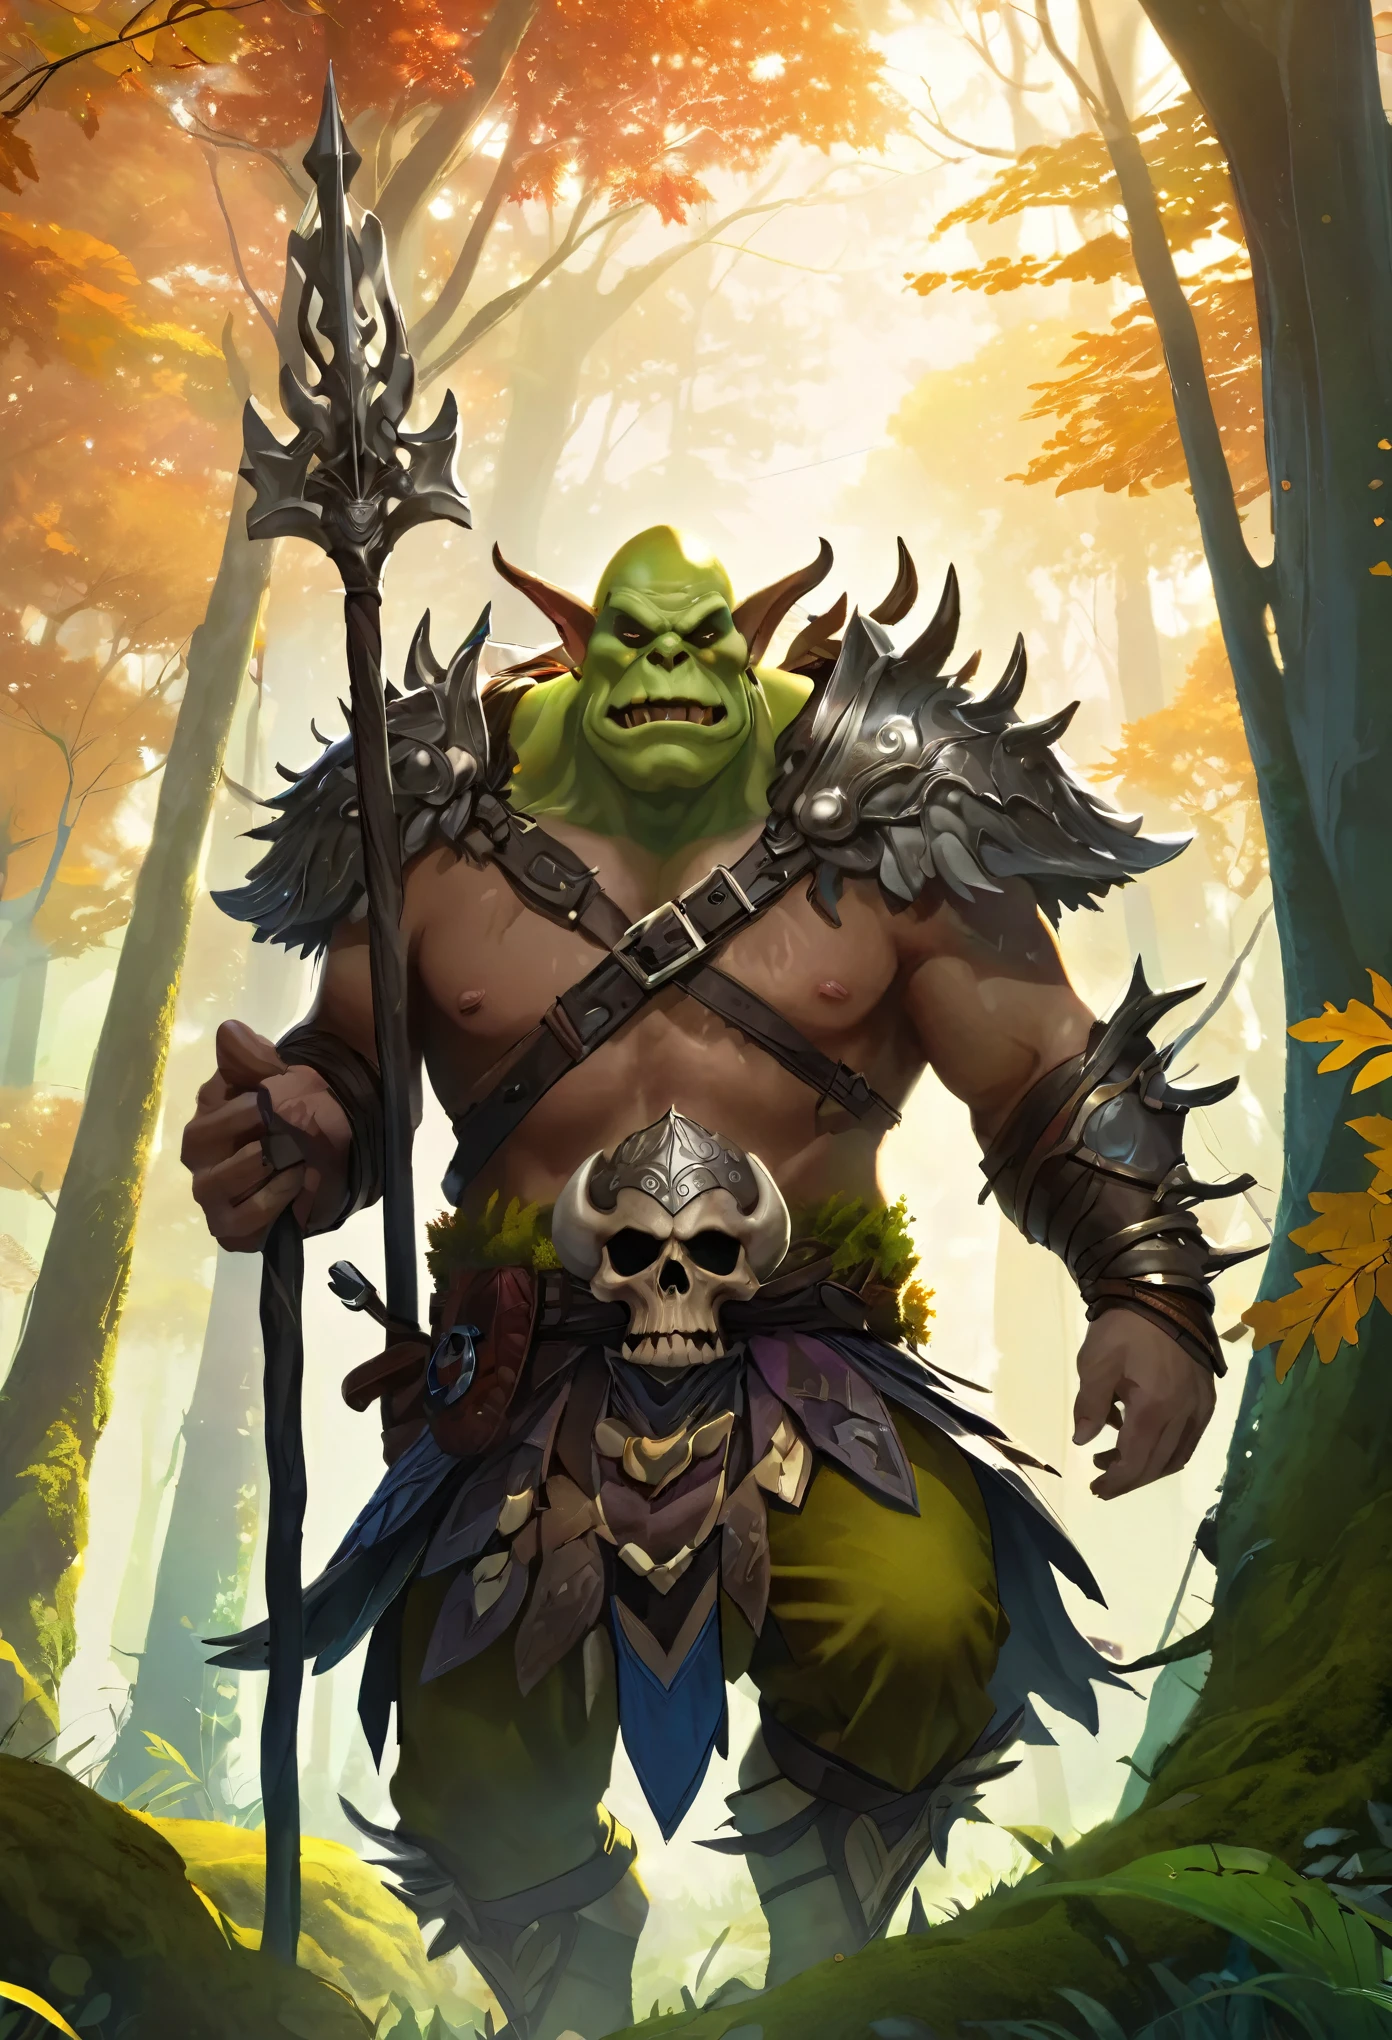 close up:1.3, (masterpiece:1.5),(Best quality:1.6), (Ultra-high resolution:1.4), strong and robust ogre, dynamic pose, with leather shoulder pads and bones, large and sharp fangs, leather belt with a skull , loincloth, detailed illustration, intricate, idyllic, magical elves in the forest:1.5, landscape, vibrant colors, sunrise, sun rays passing through the trees, leaves falling from the trees, dew on the leaves and plants, clouds, (( magical, Beautiful, otherworldly, Trees:1.4 )), (( Best quality, vibrant, 32k, clear and well-defined shadows)).